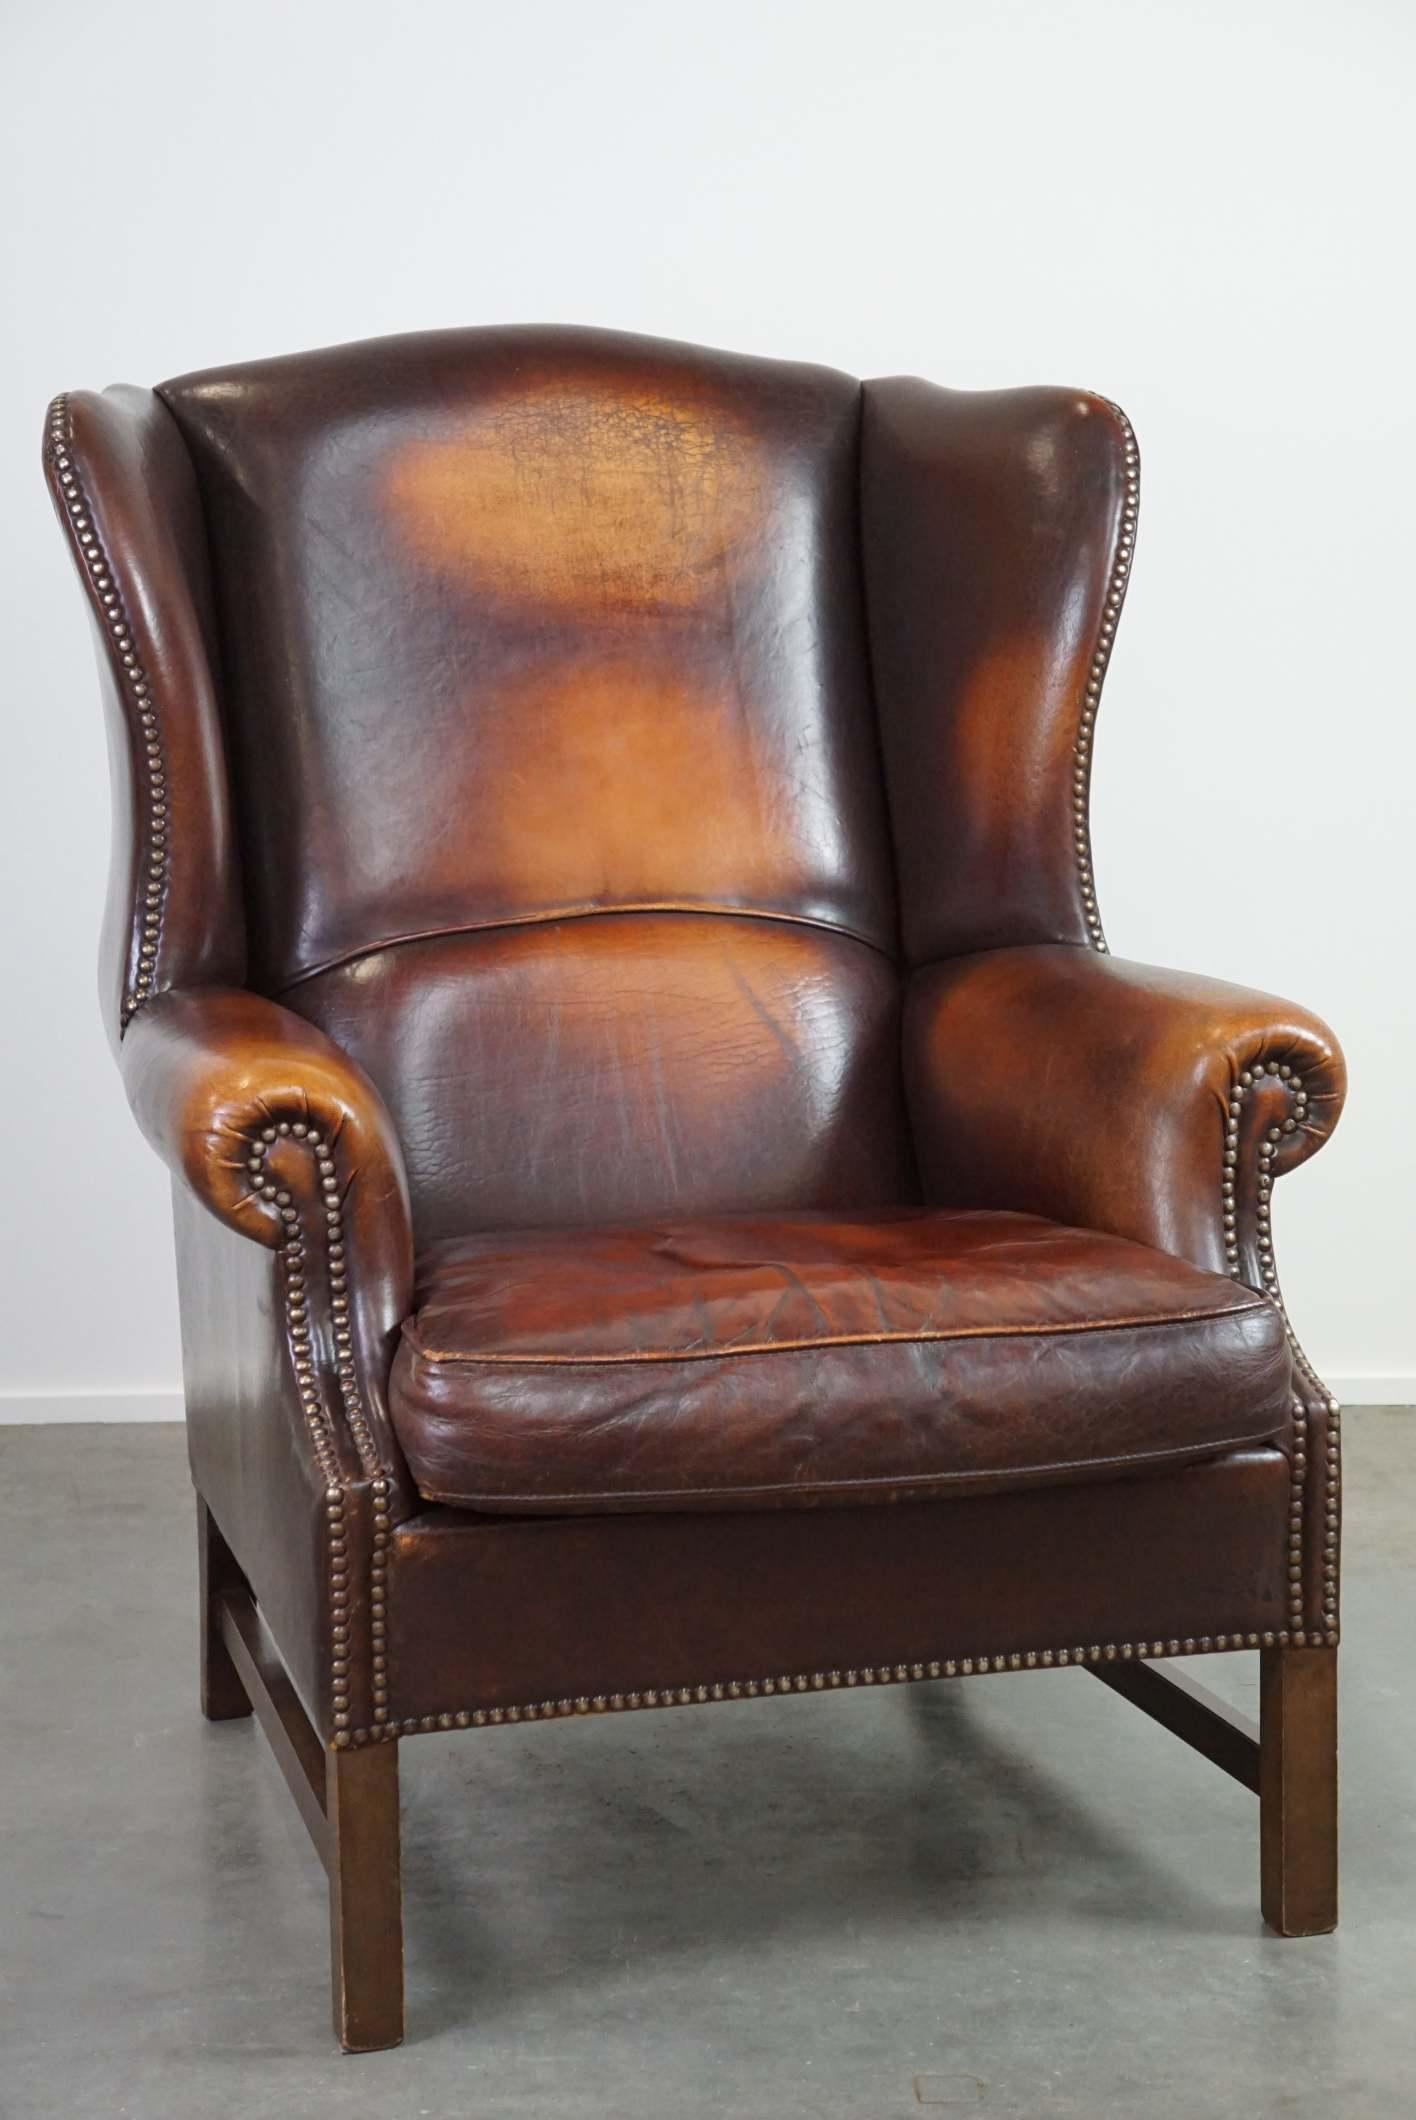 Offered: this beautiful classic and stately wingback armchair made of sheep leather with lovely colors and a timeless appeal.

This armchair is in good condition, with only a few normal signs of use, and boasts a luxurious and timeless appearance.